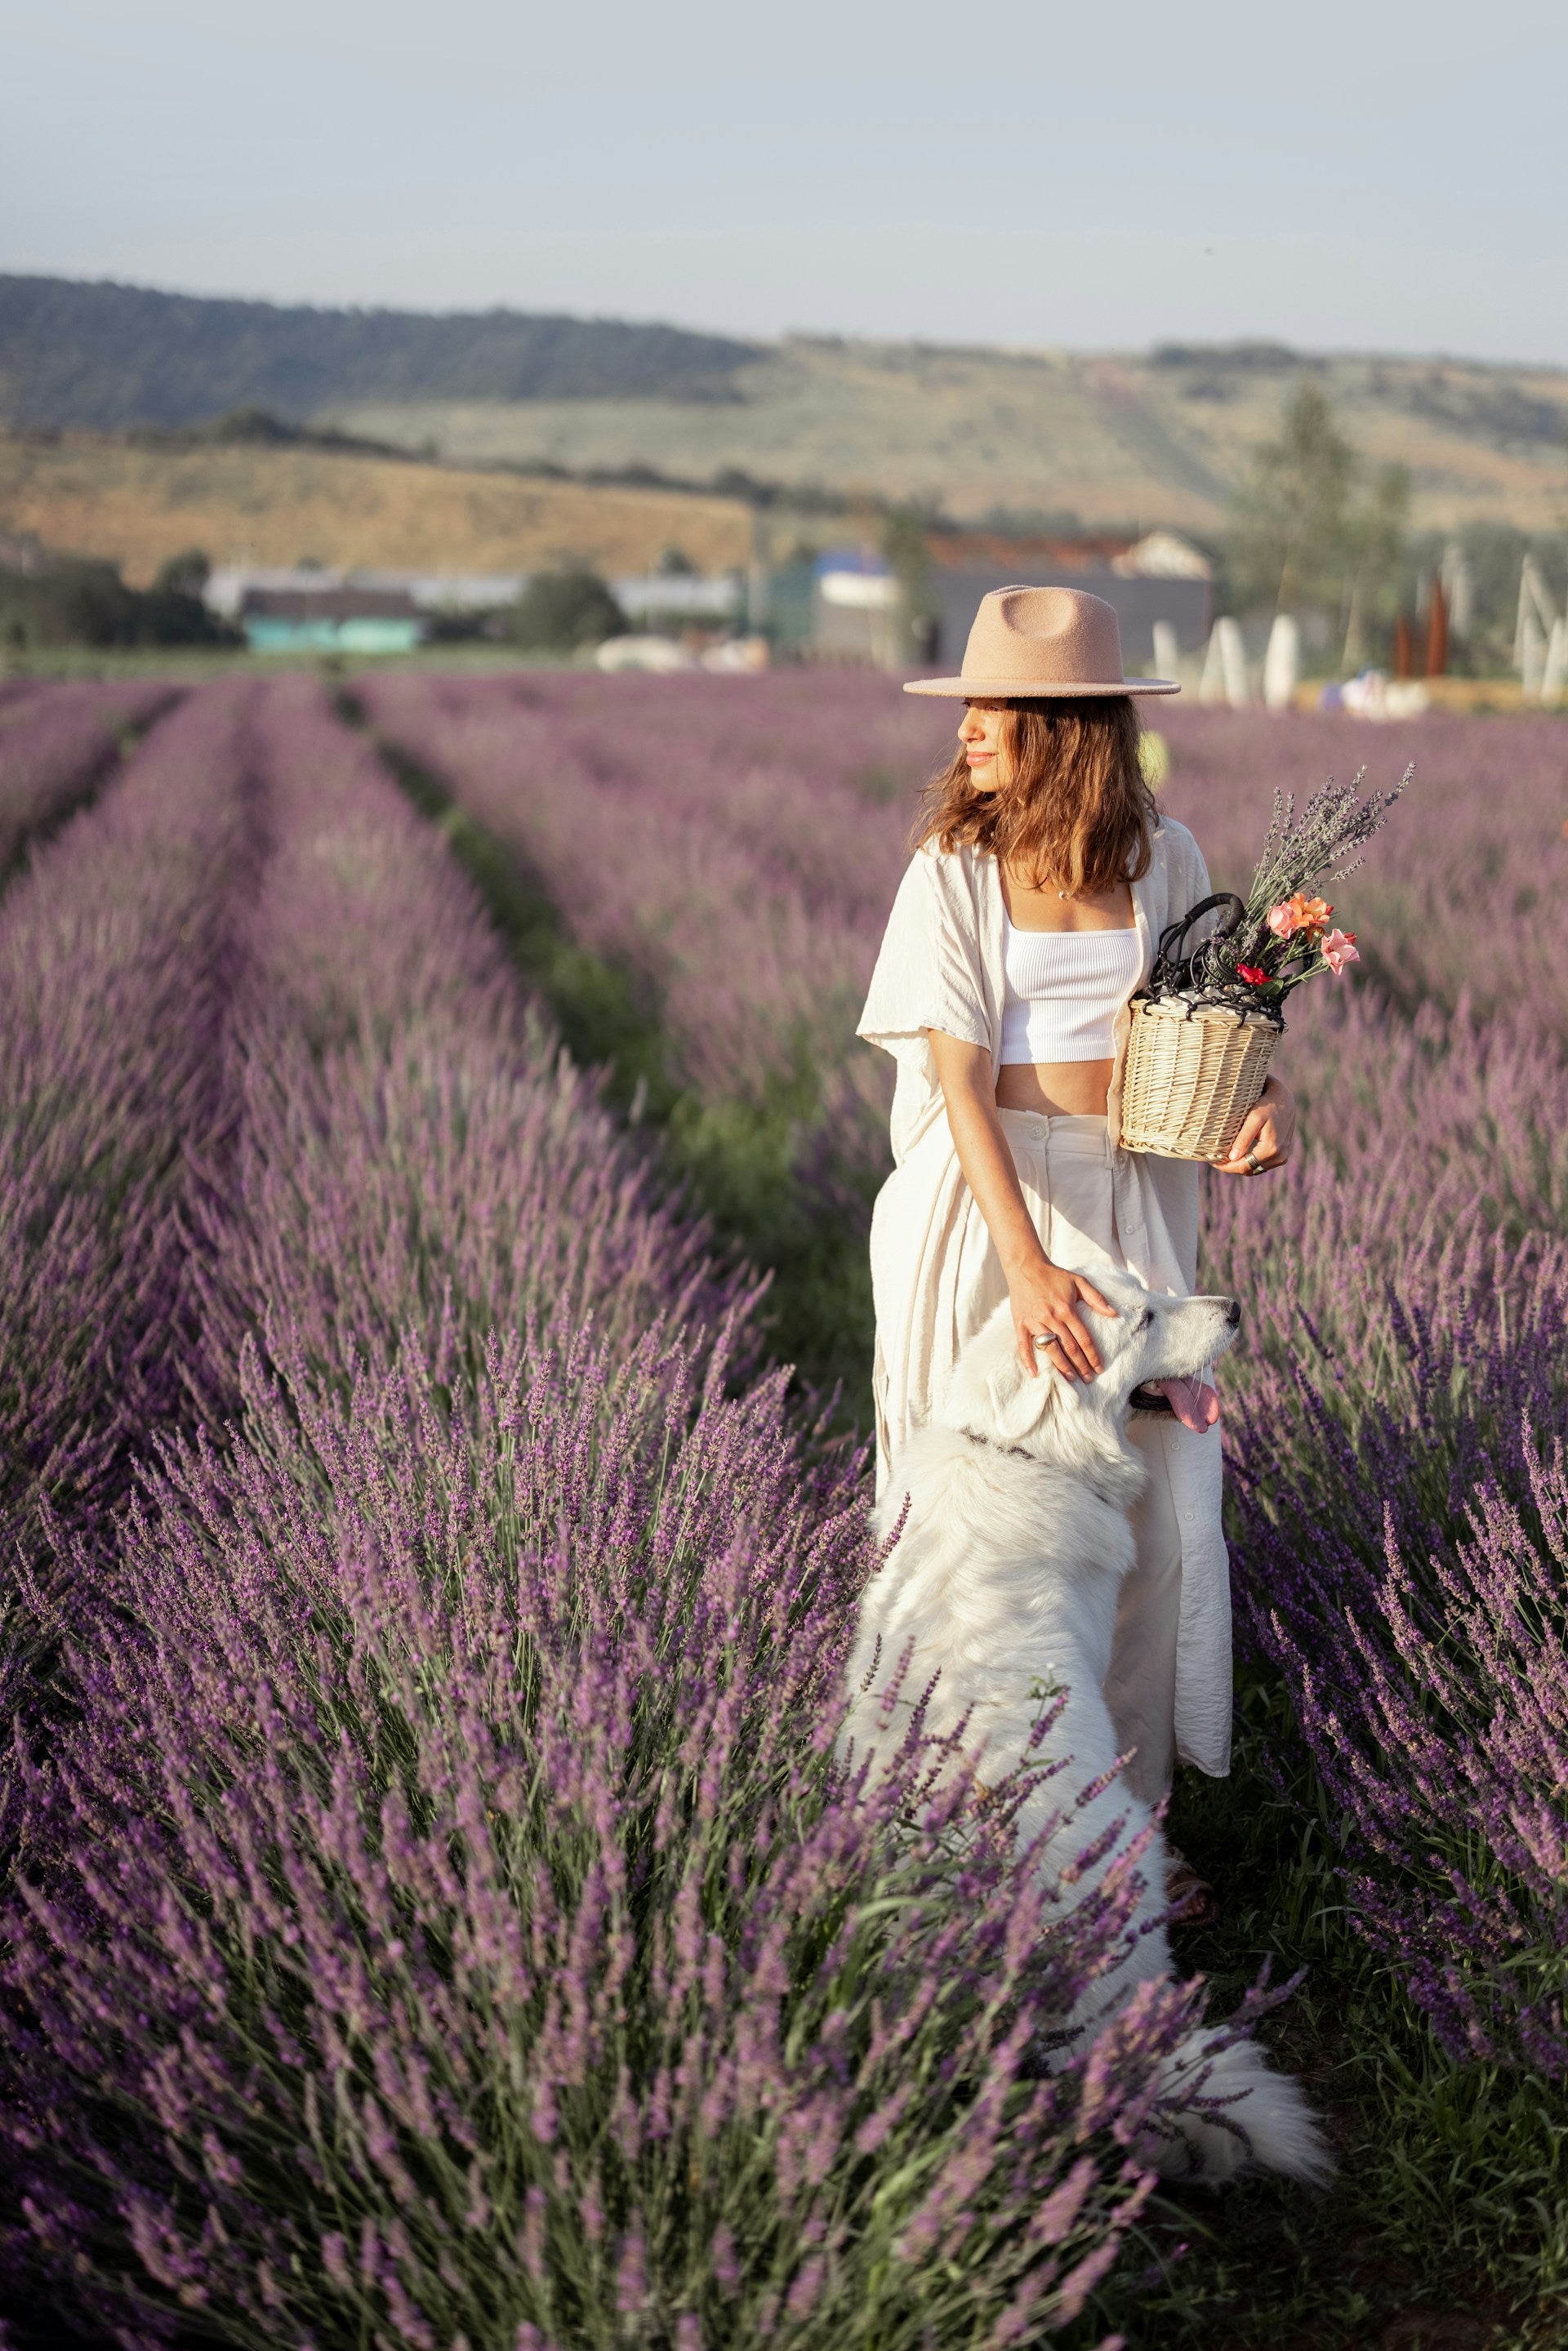 Blonde woman with short hair walking through a field of lavender with her dog